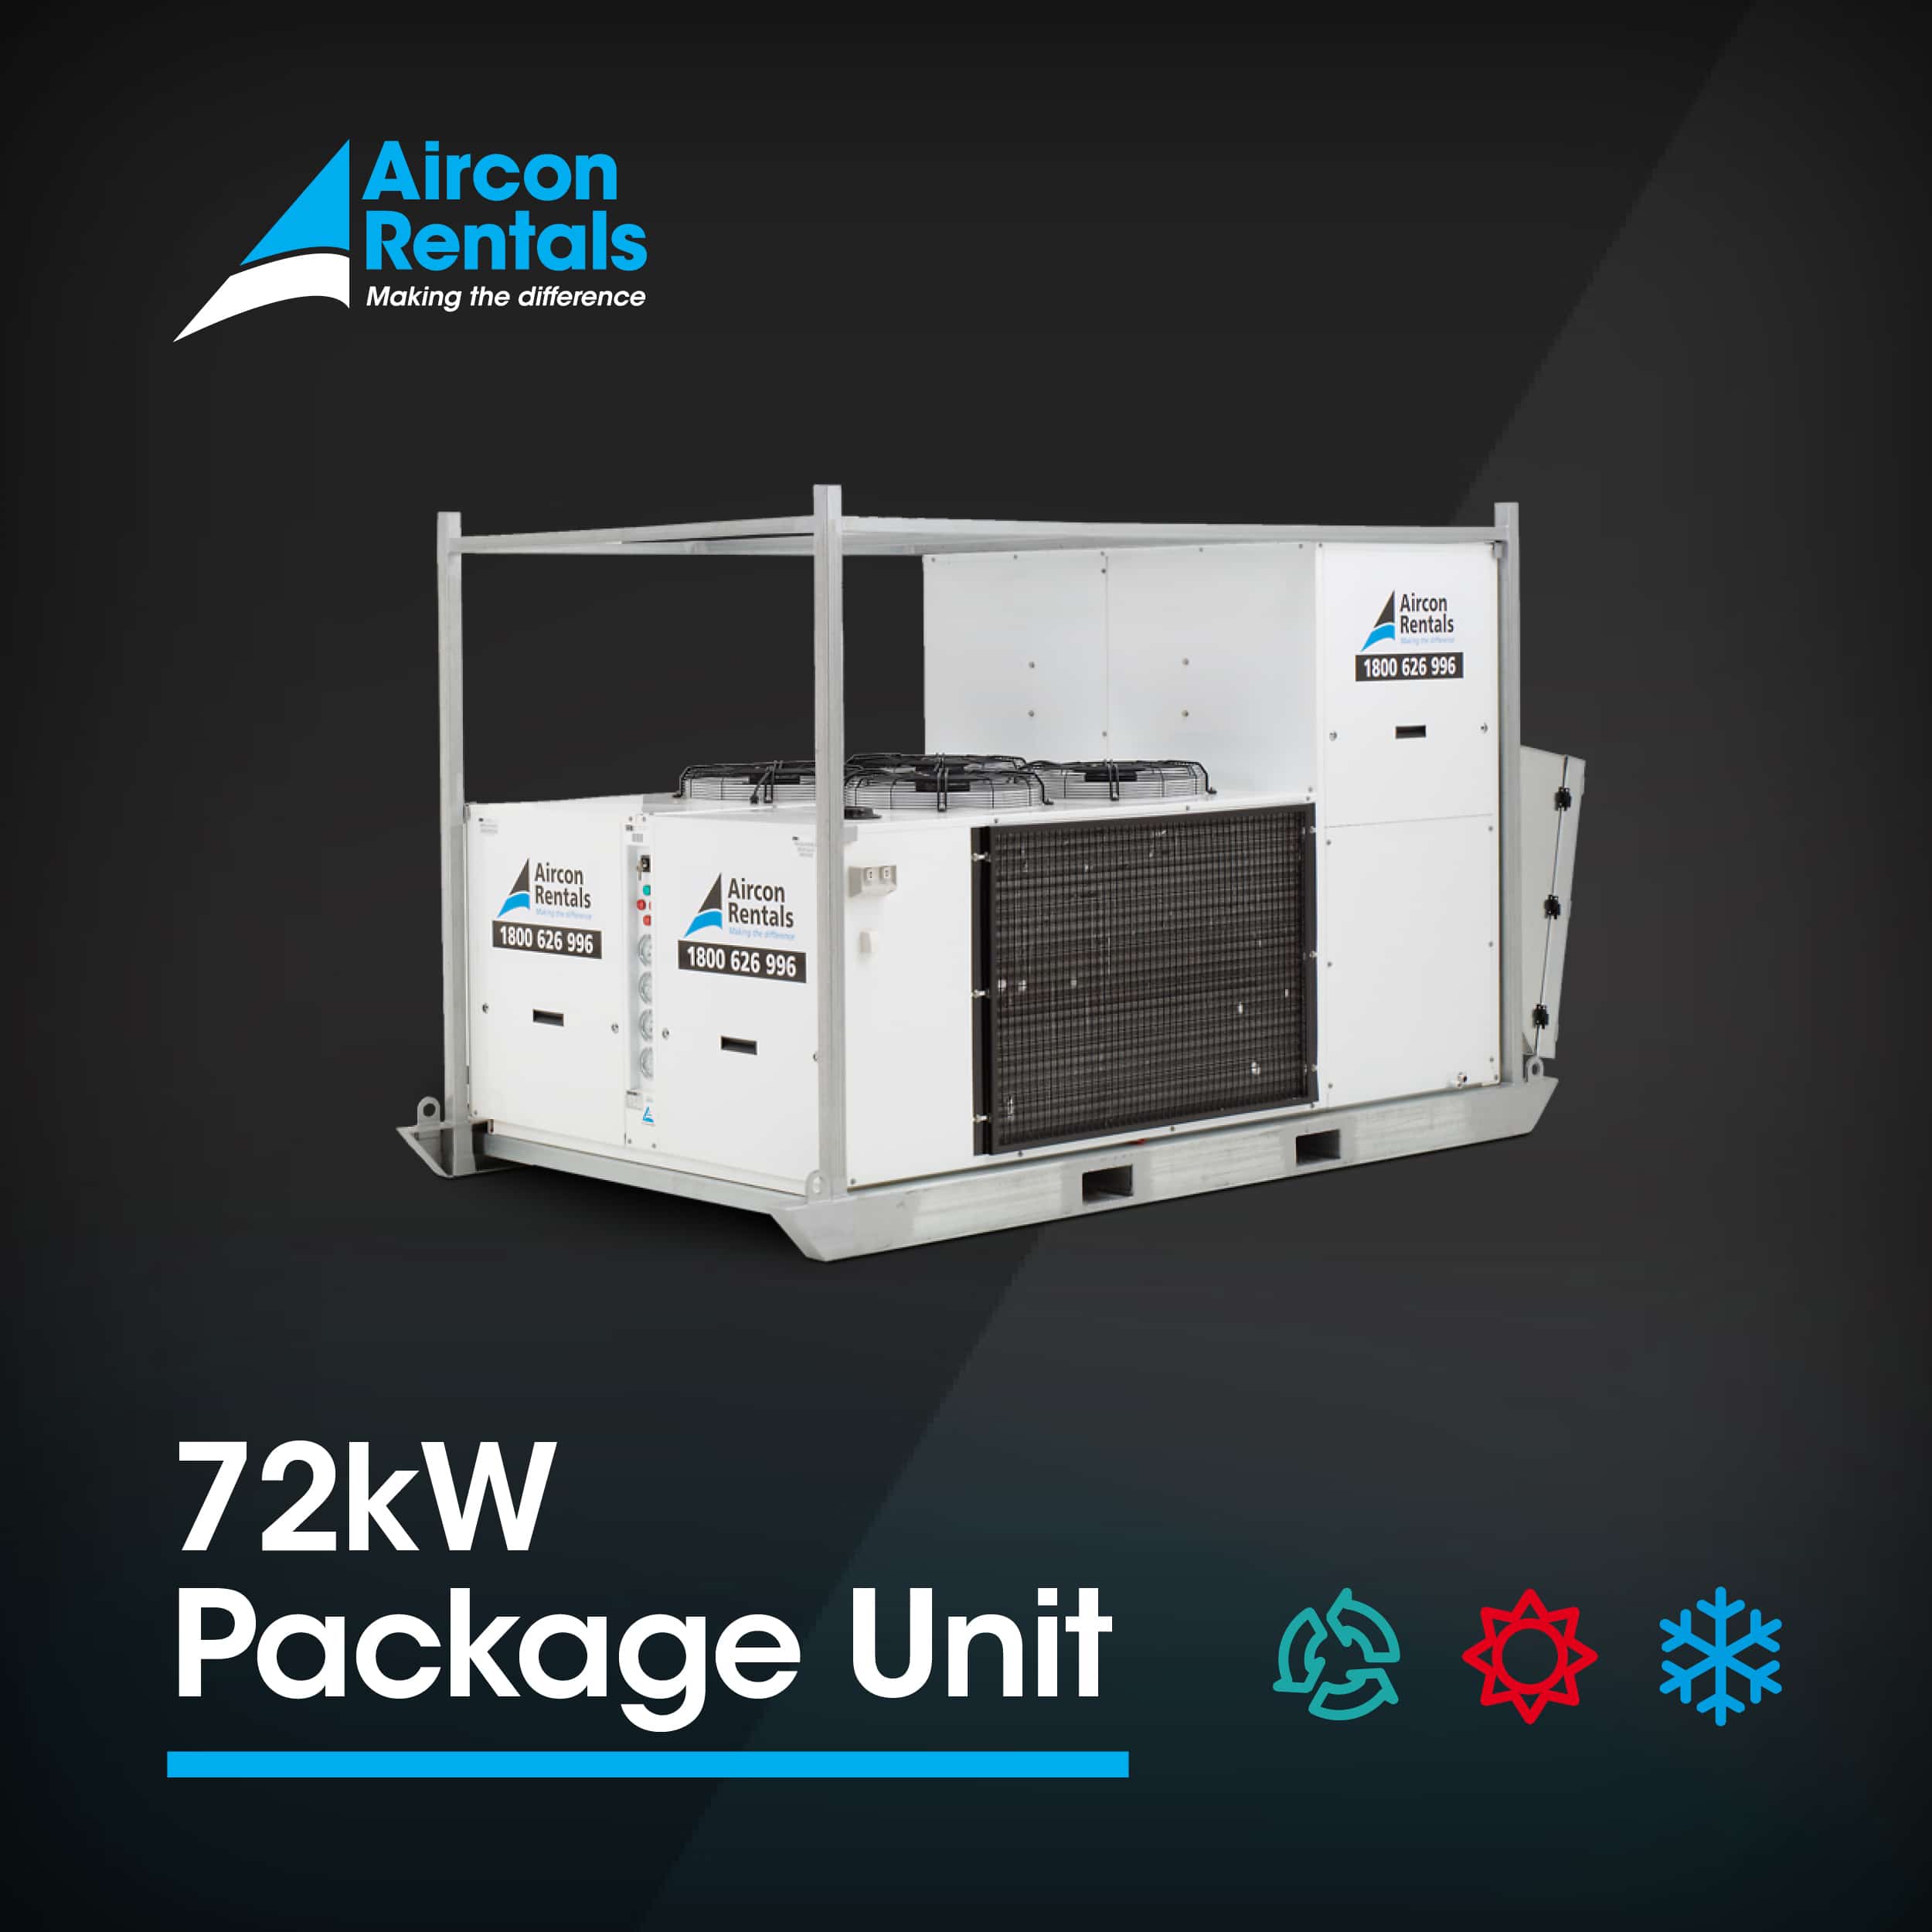 School Aircon Hire 72kw Package Unit | Packaged air conditioners | Aircon Rentals